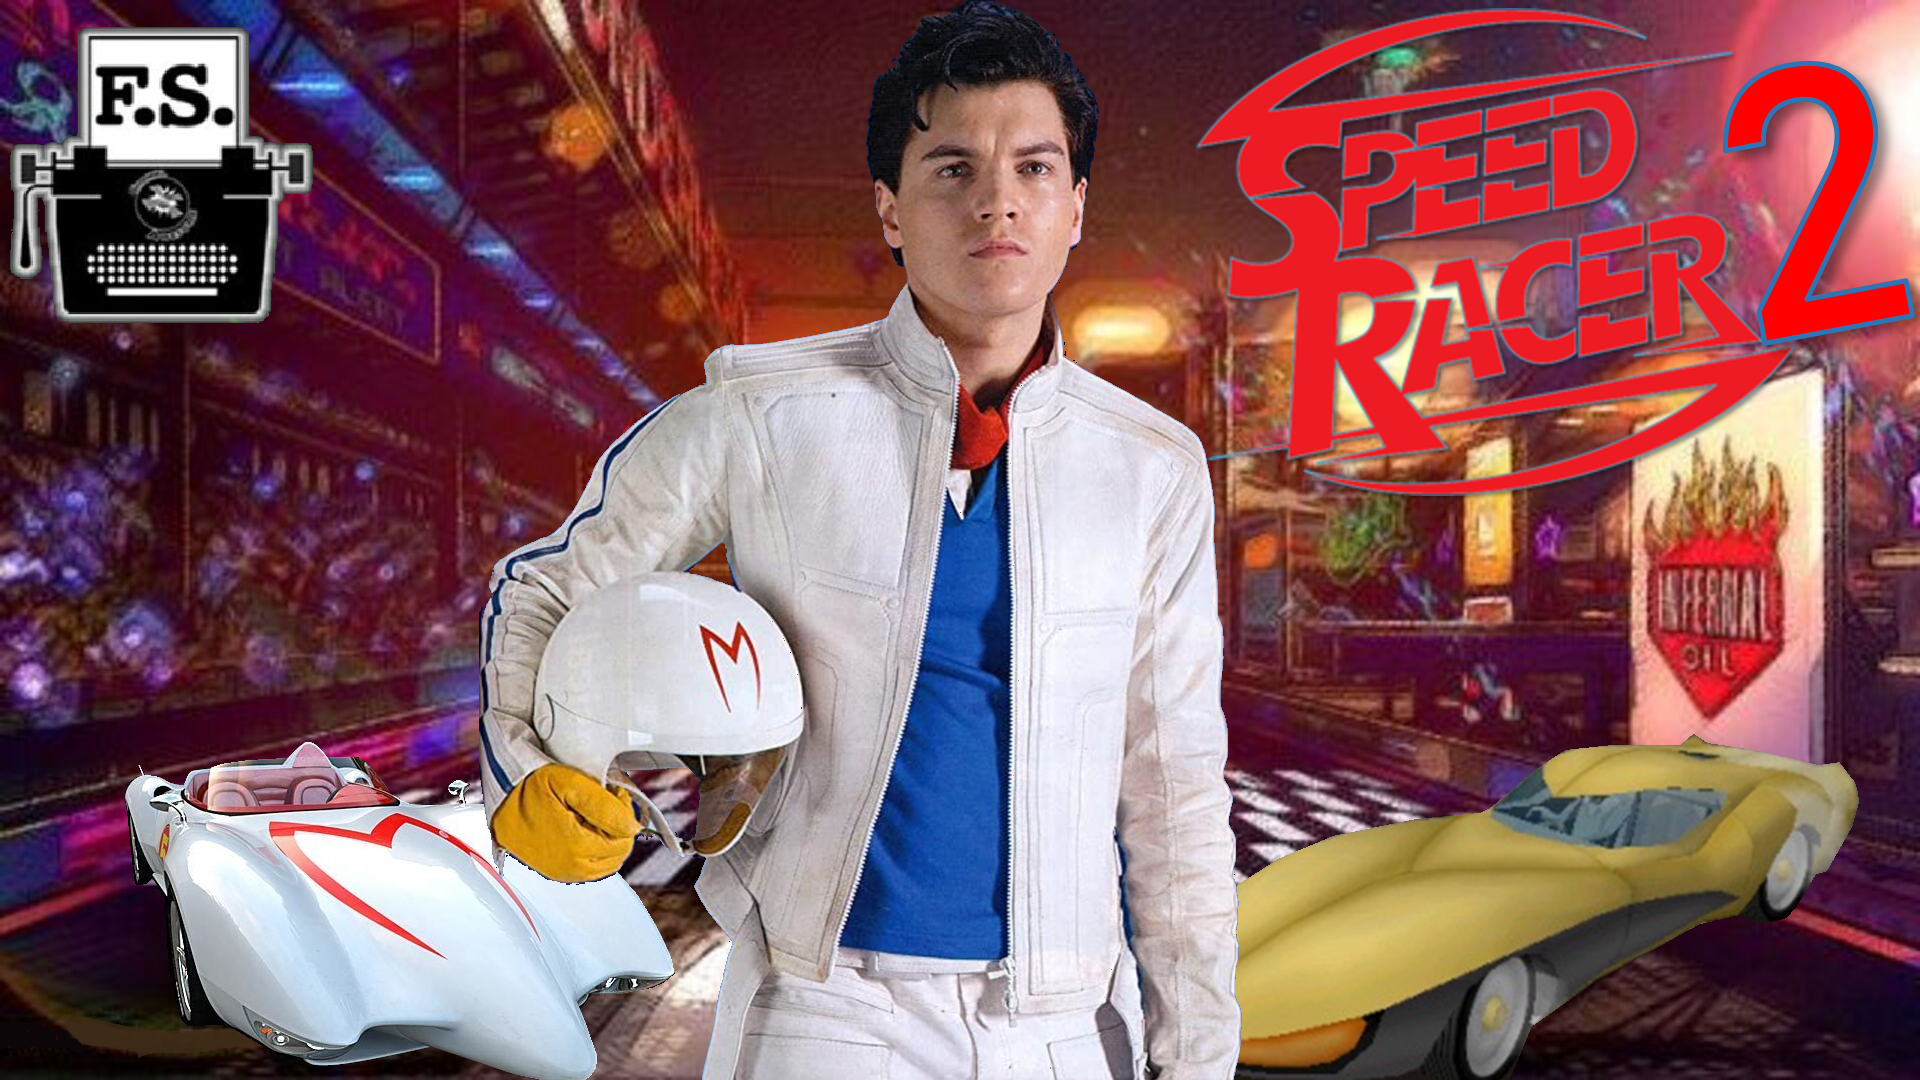 Hey I Draw — I watched a compilation of Speed Racer with guns